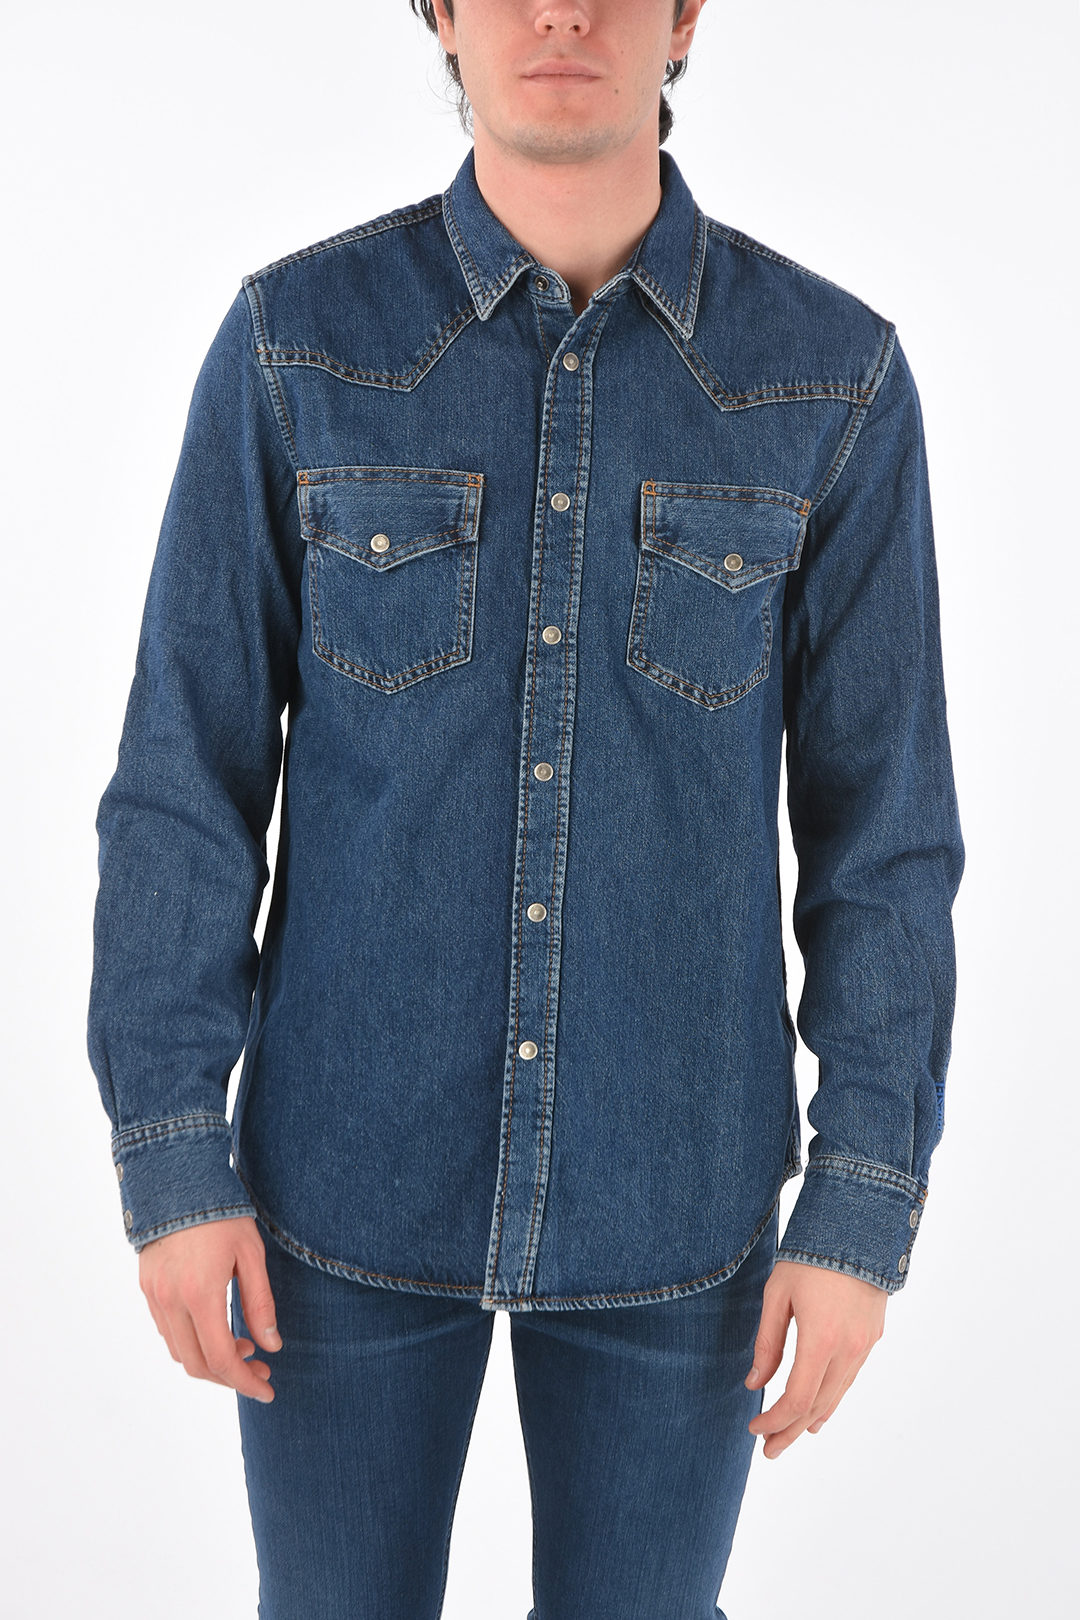 Authenticatie Menagerry Minder Diesel denim D-EAST-P shirt with breast pockets men - Glamood Outlet